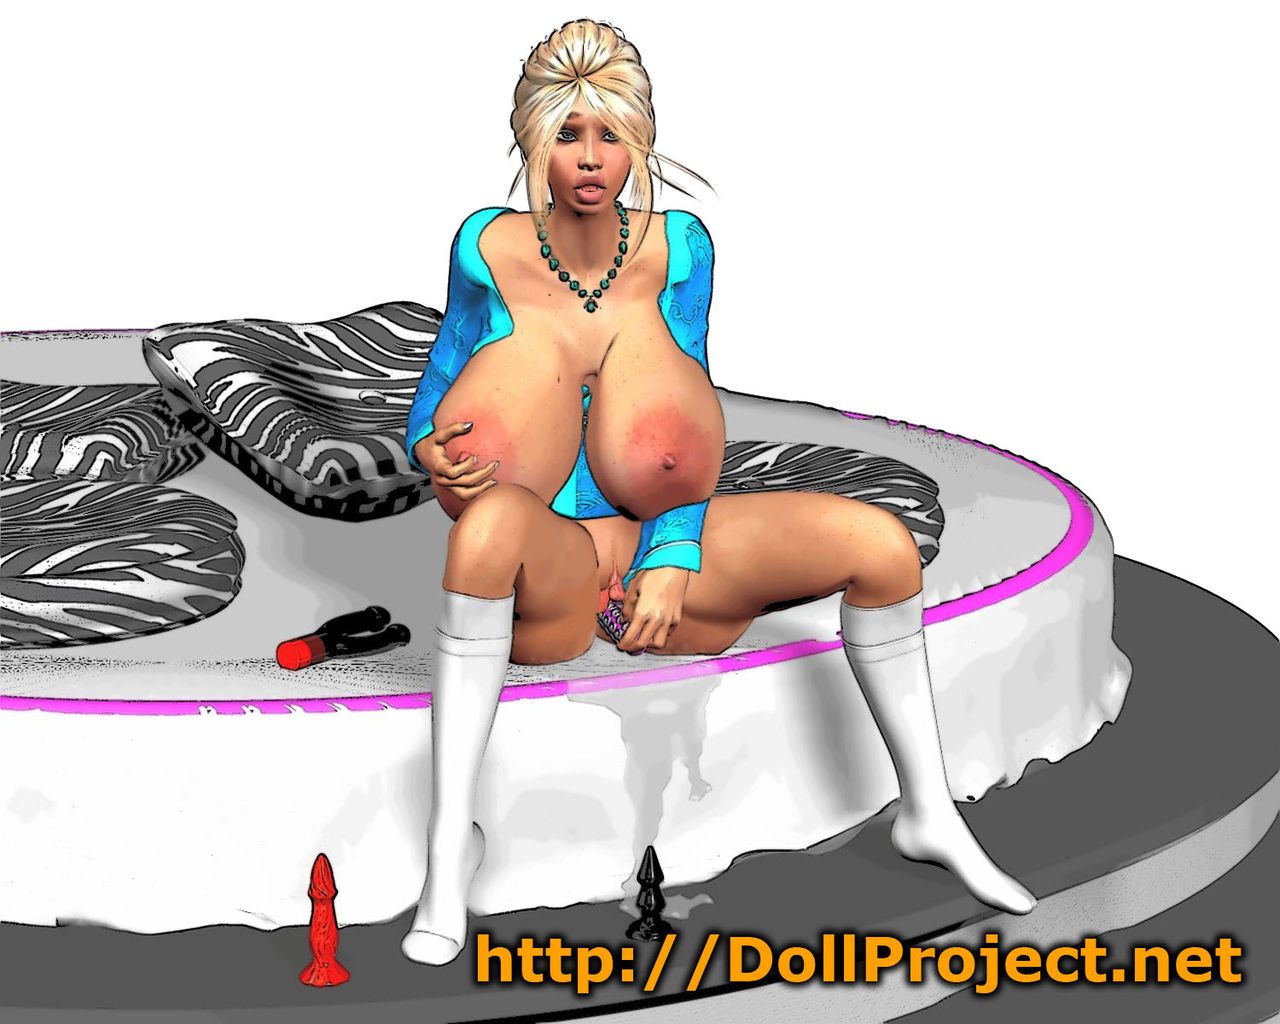 DollProject 9